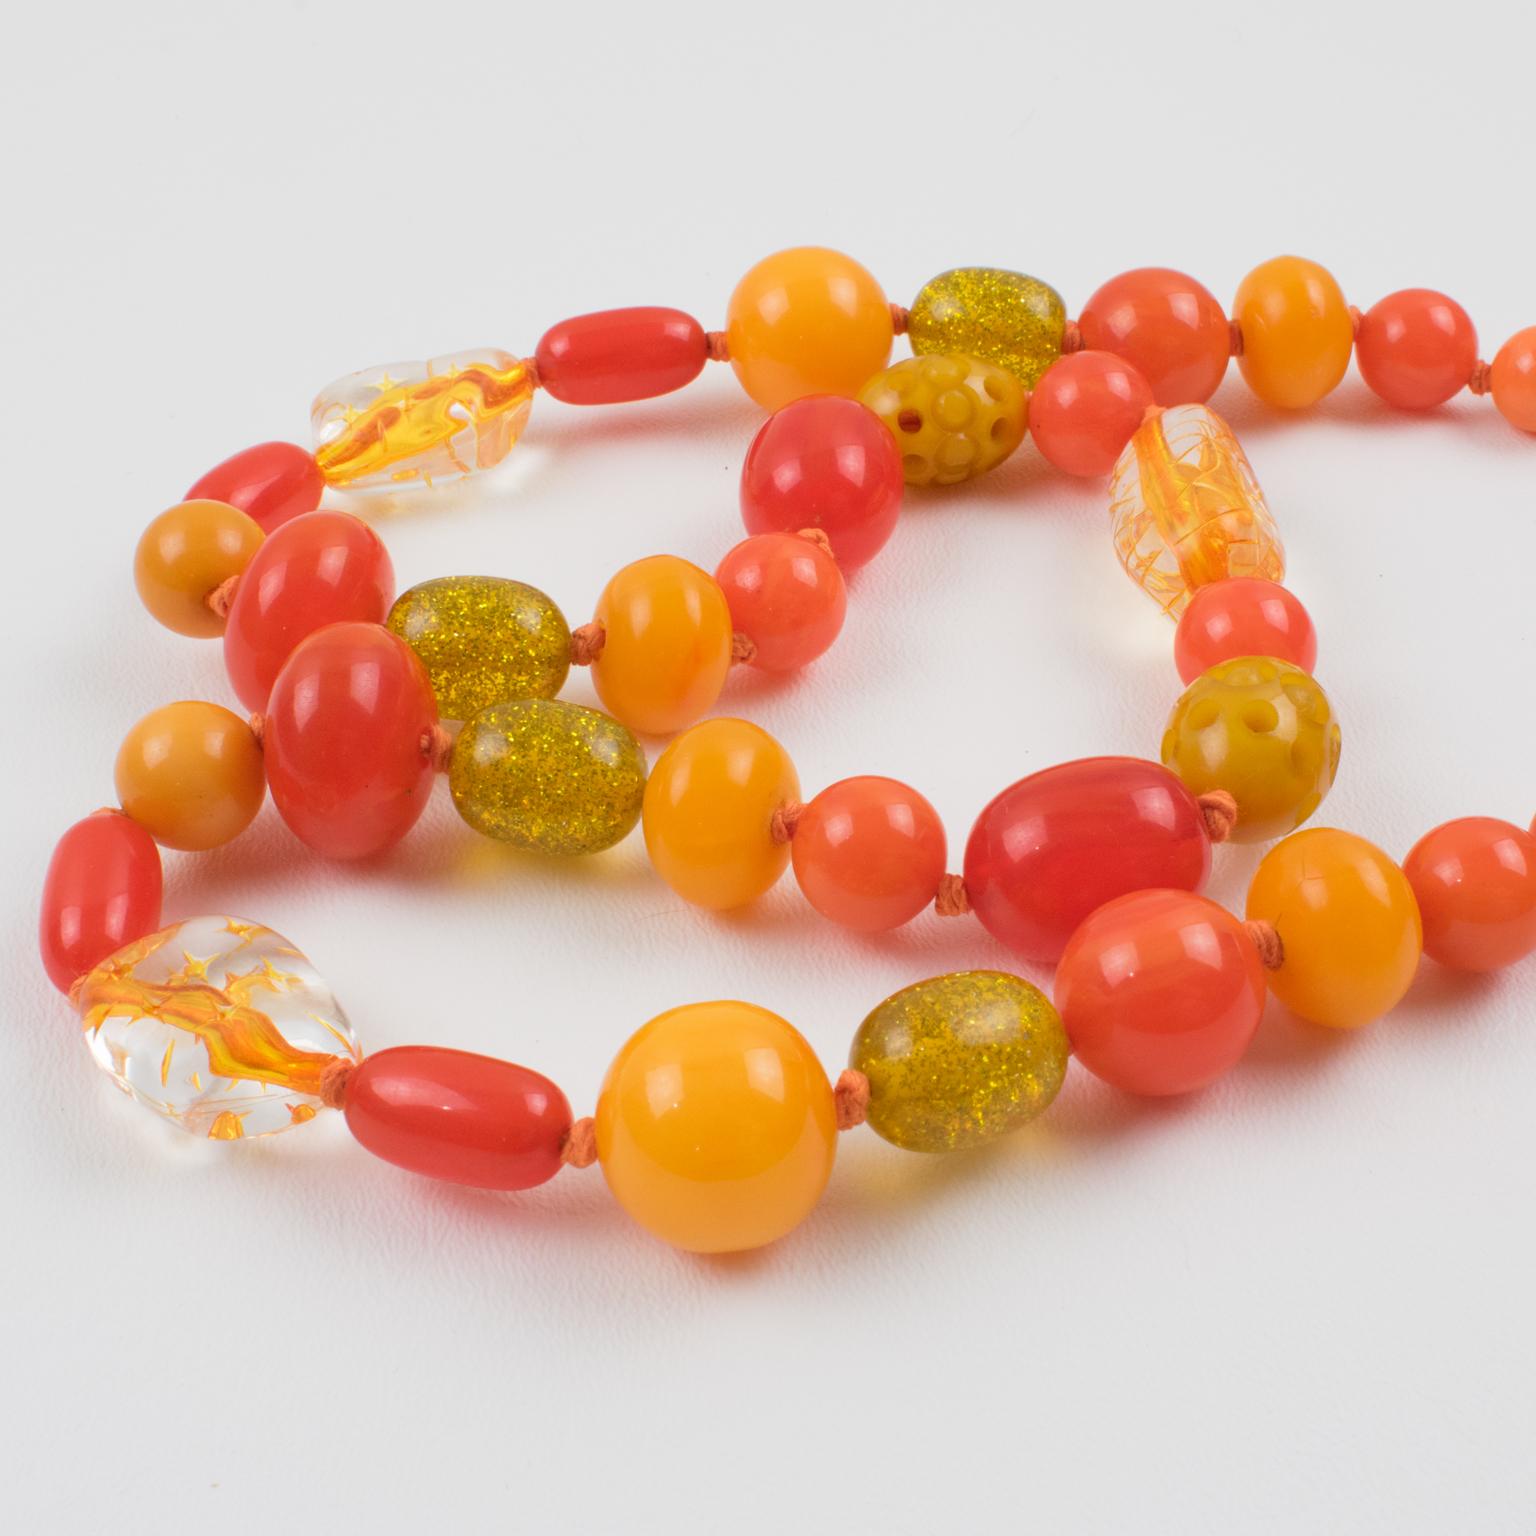 Bakelite and Lucite Long Necklace Sunny Yellow and Orange Colors For Sale 1